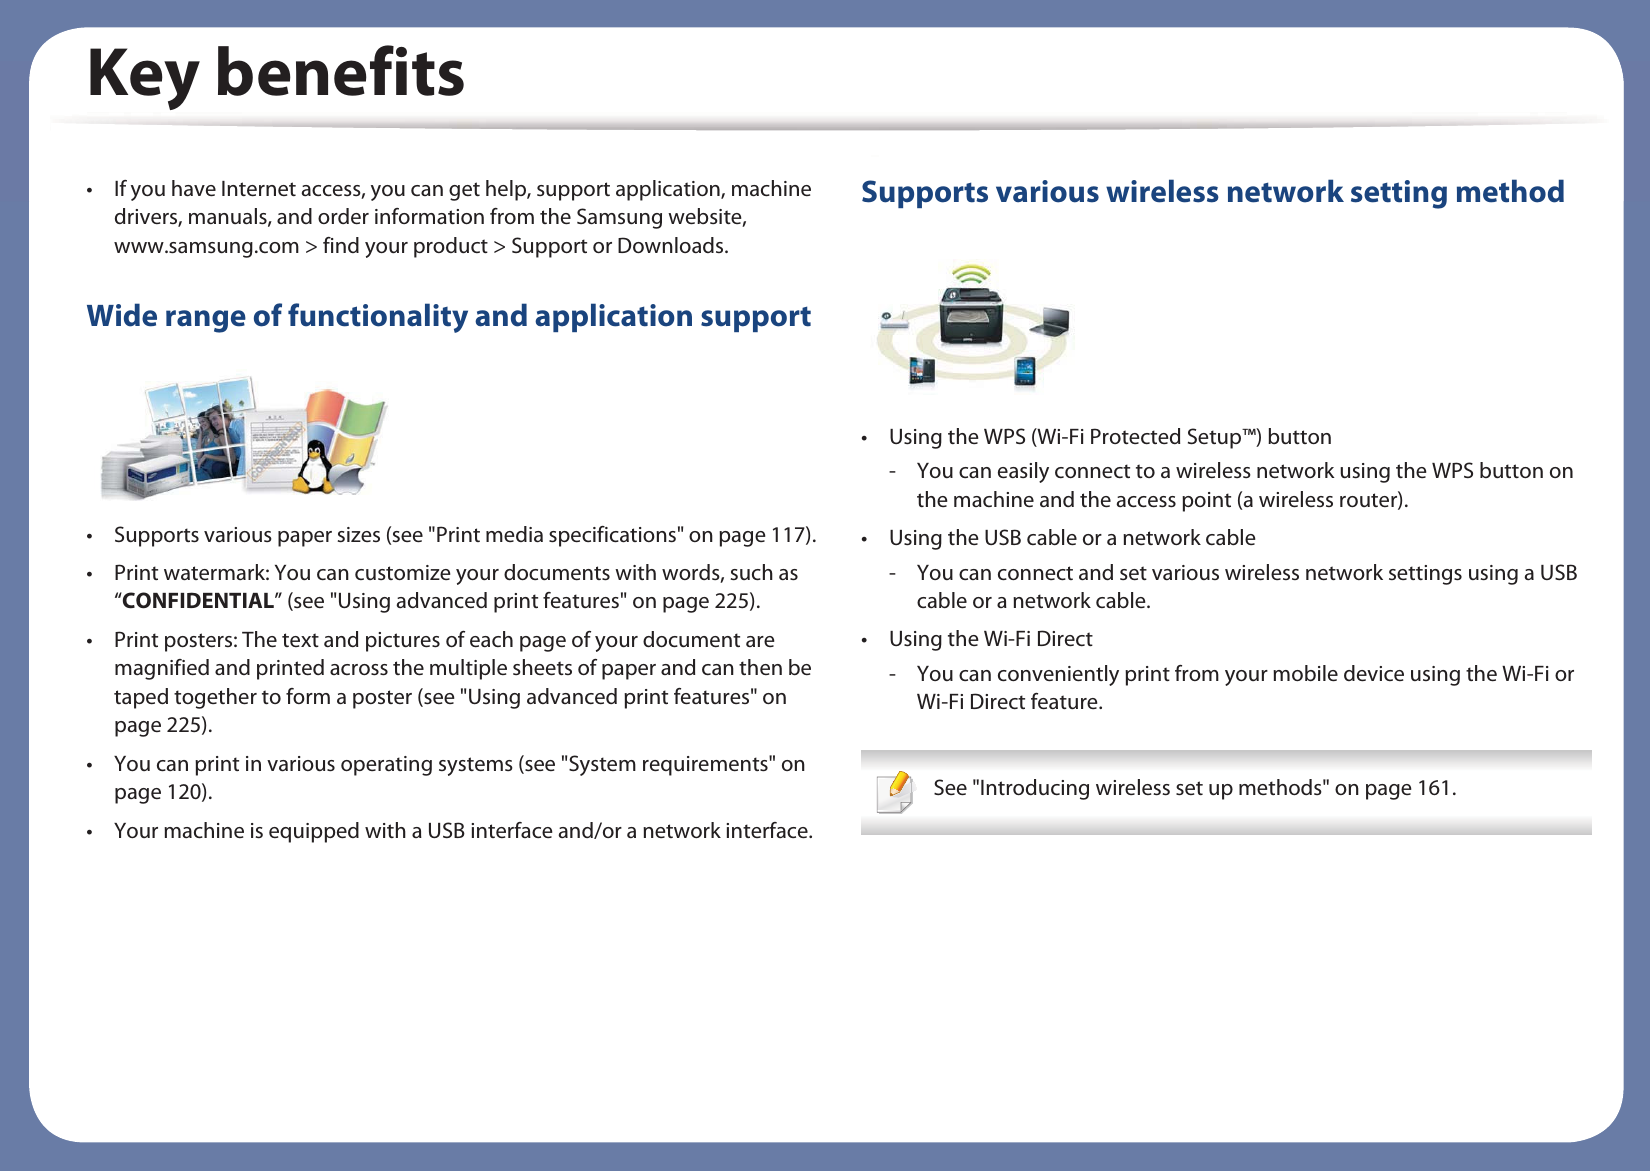 Key benefits• If you have Internet access, you can get help, support application, machine drivers, manuals, and order information from the Samsung website, www.samsung.com &gt; find your product &gt; Support or Downloads.Wide range of functionality and application support• Supports various paper sizes (see &quot;Print media specifications&quot; on page 117).• Print watermark: You can customize your documents with words, such as “CONFIDENTIAL” (see &quot;Using advanced print features&quot; on page 225).• Print posters: The text and pictures of each page of your document are magnified and printed across the multiple sheets of paper and can then be taped together to form a poster (see &quot;Using advanced print features&quot; on page 225).• You can print in various operating systems (see &quot;System requirements&quot; on page 120).• Your machine is equipped with a USB interface and/or a network interface.Supports various wireless network setting method • Using the WPS (Wi-Fi Protected Setup™) button- You can easily connect to a wireless network using the WPS button on the machine and the access point (a wireless router).• Using the USB cable or a network cable- You can connect and set various wireless network settings using a USB cable or a network cable.• Using the Wi-Fi Direct- You can conveniently print from your mobile device using the Wi-Fi or Wi-Fi Direct feature. See &quot;Introducing wireless set up methods&quot; on page 161. 